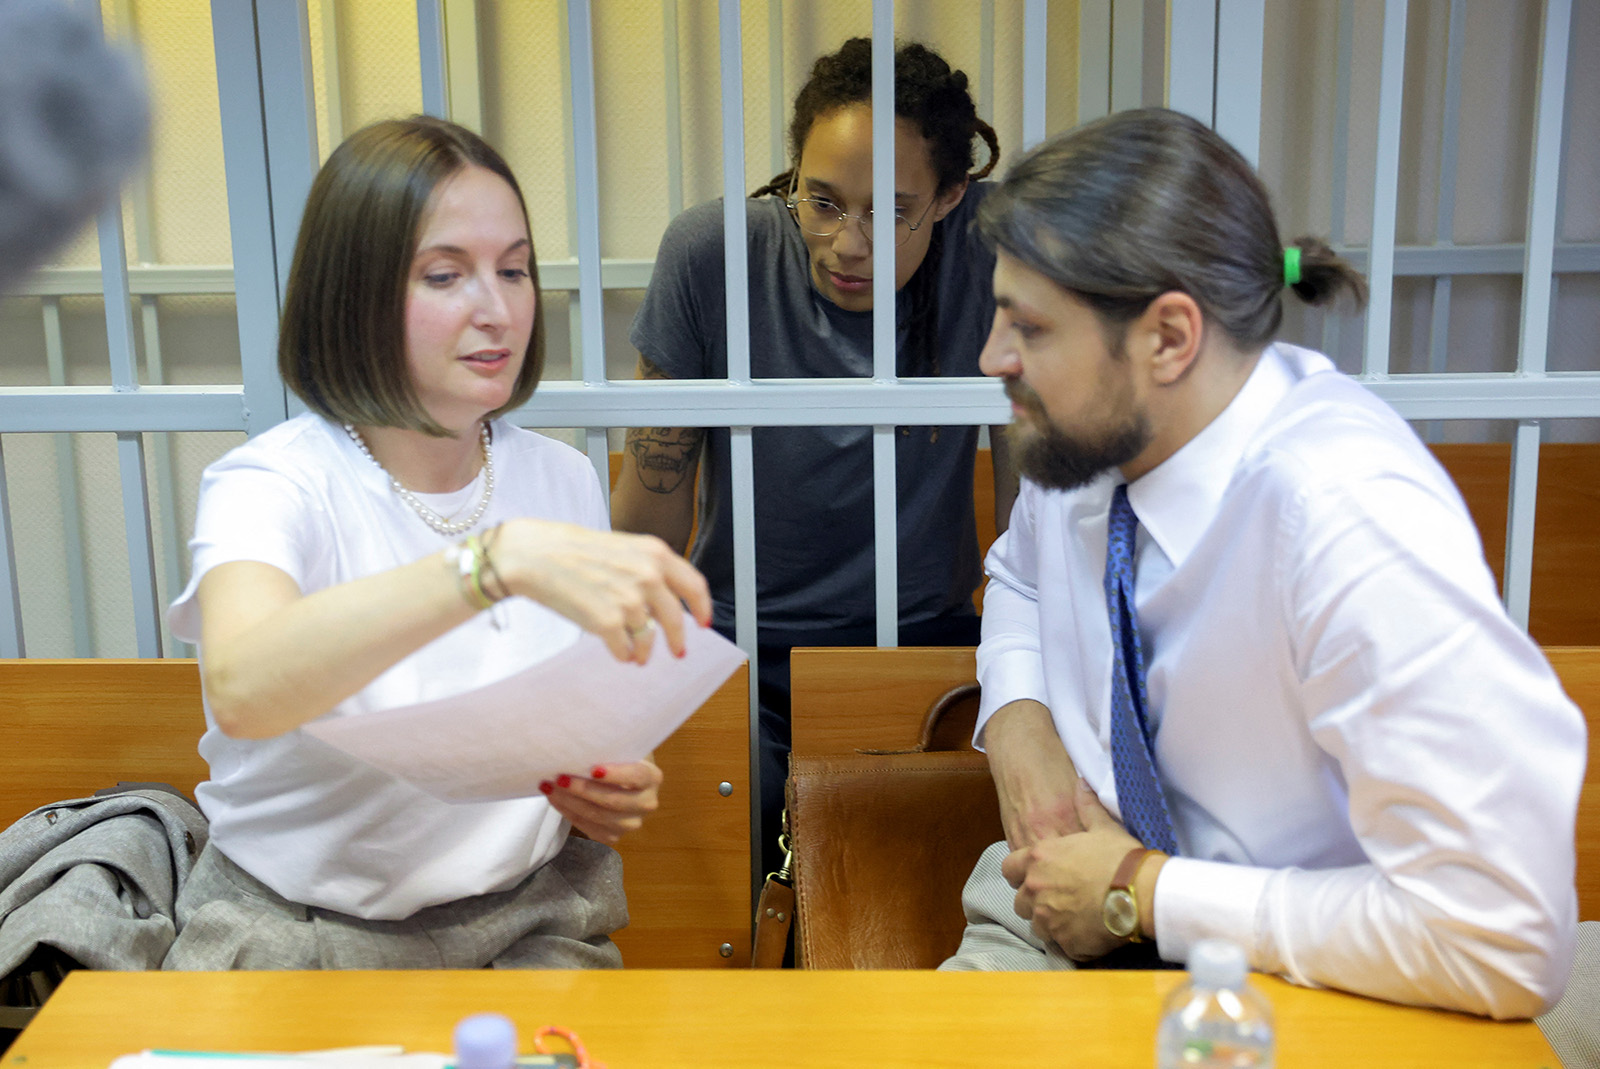 Attorneys Maria Blagovolina and Alexander Boykov and U.S. basketball player Brittney Griner speak before a court hearing in Khimki outside Moscow, Russia, on August 4.